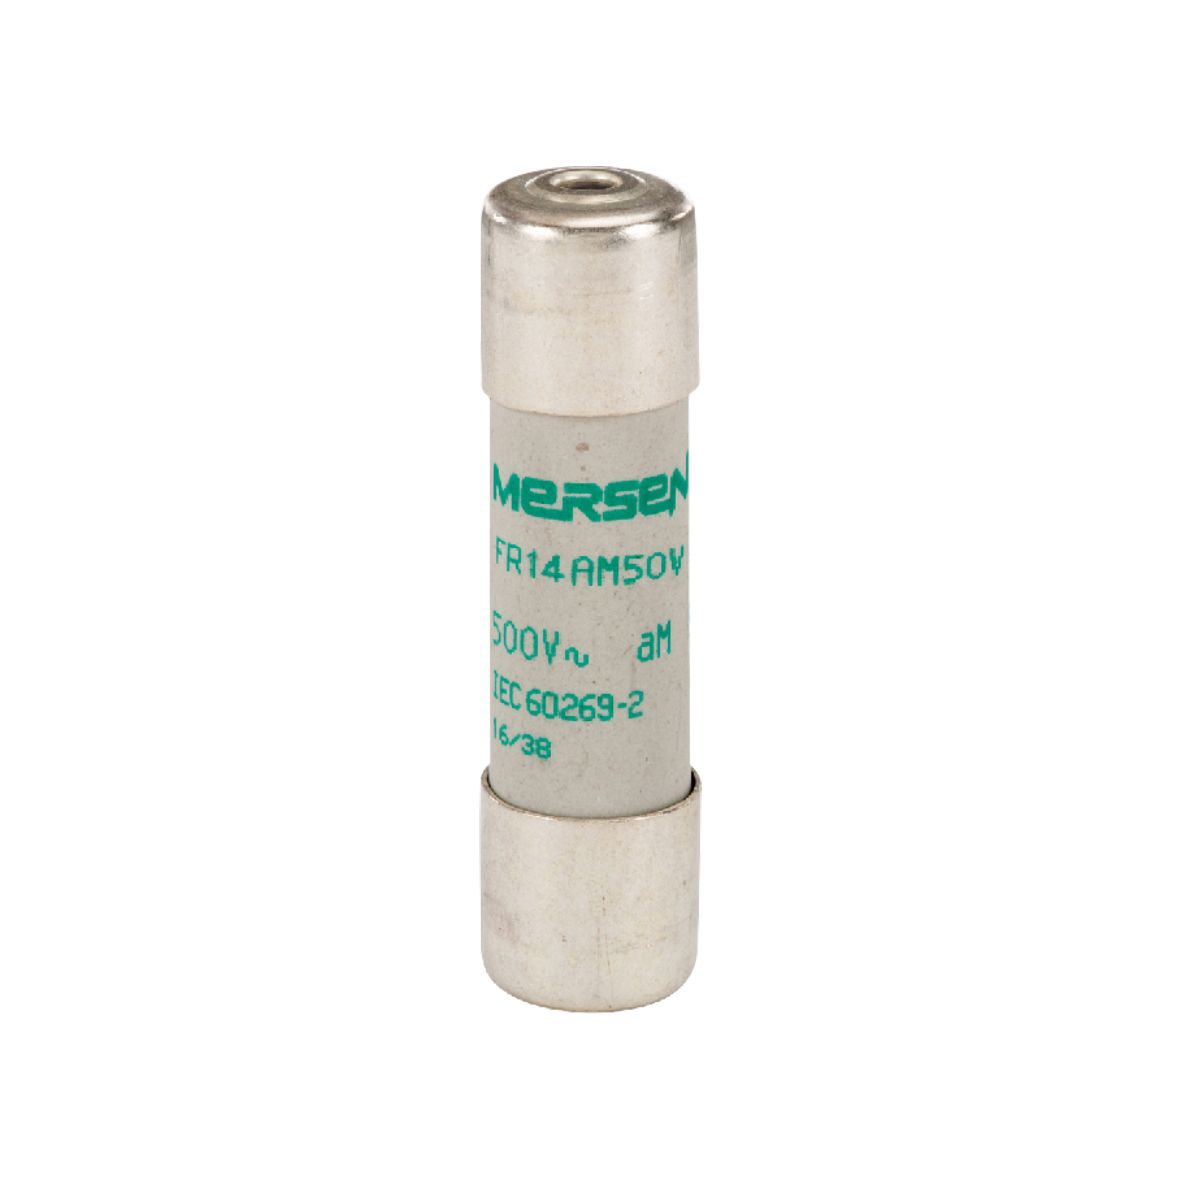 G211560 - Cylindrical fuse-link aM 500VAC 14.3x51, 16A with striker